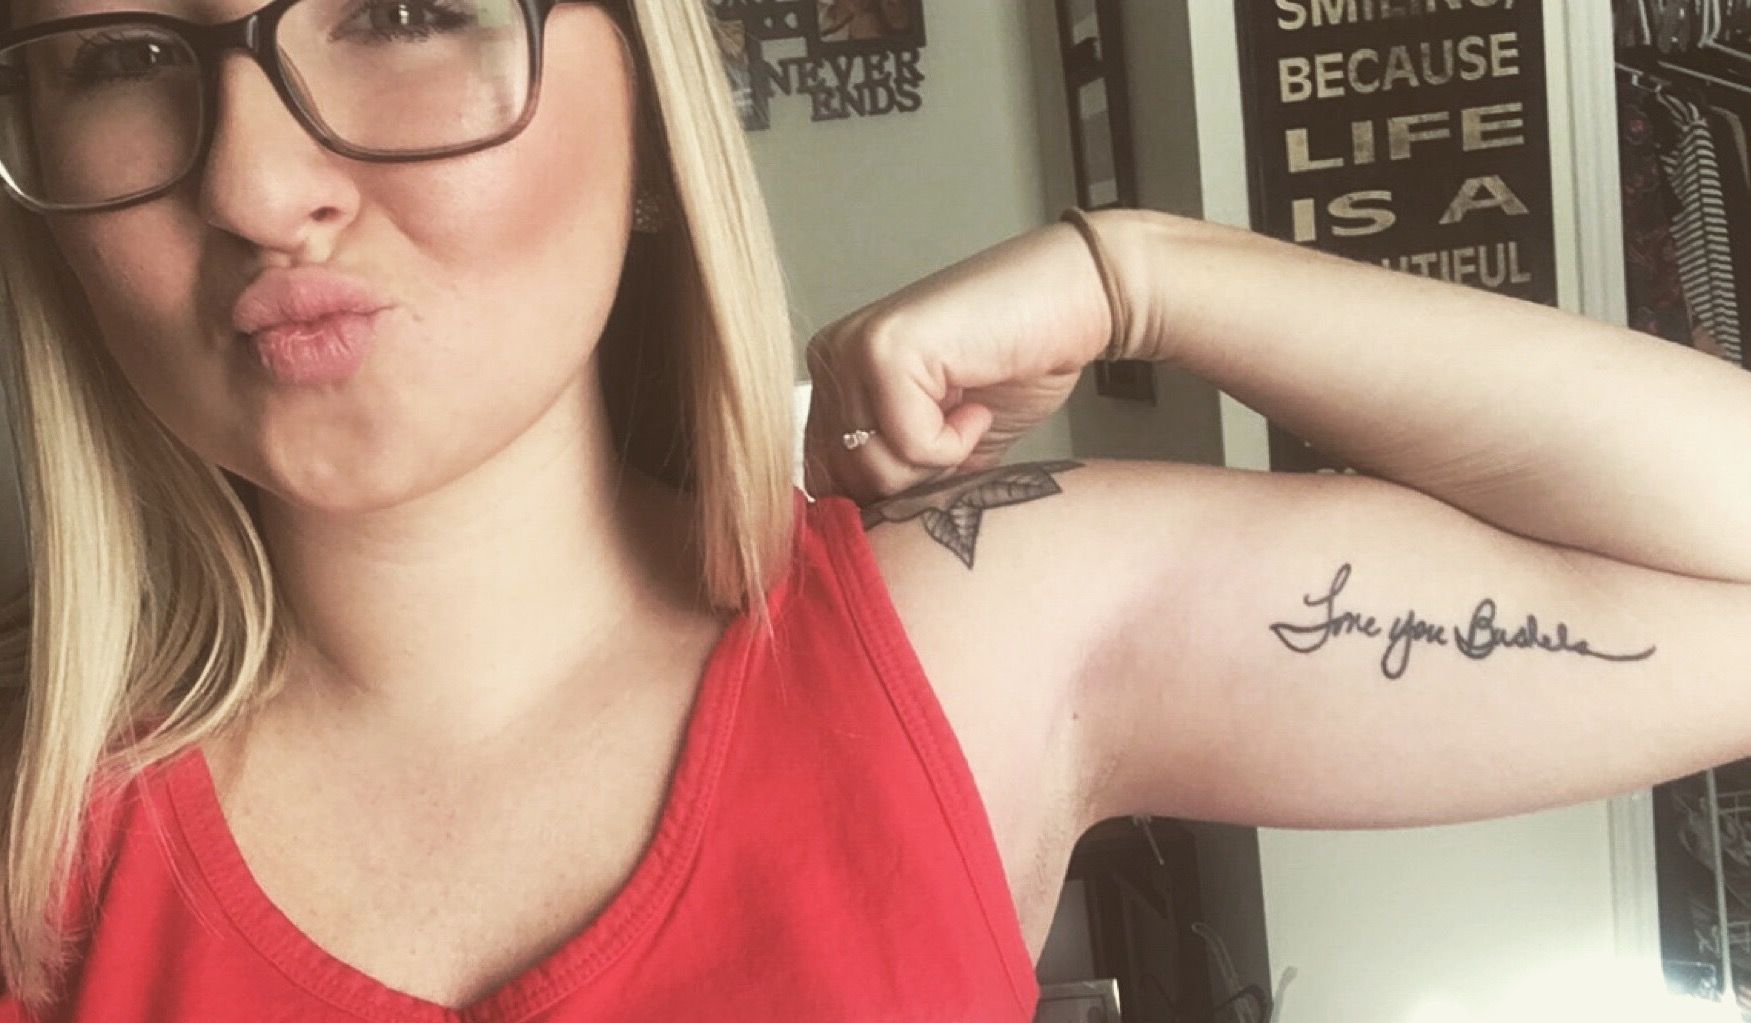 50 Mental Health Tattoos For Anxiety  Depression